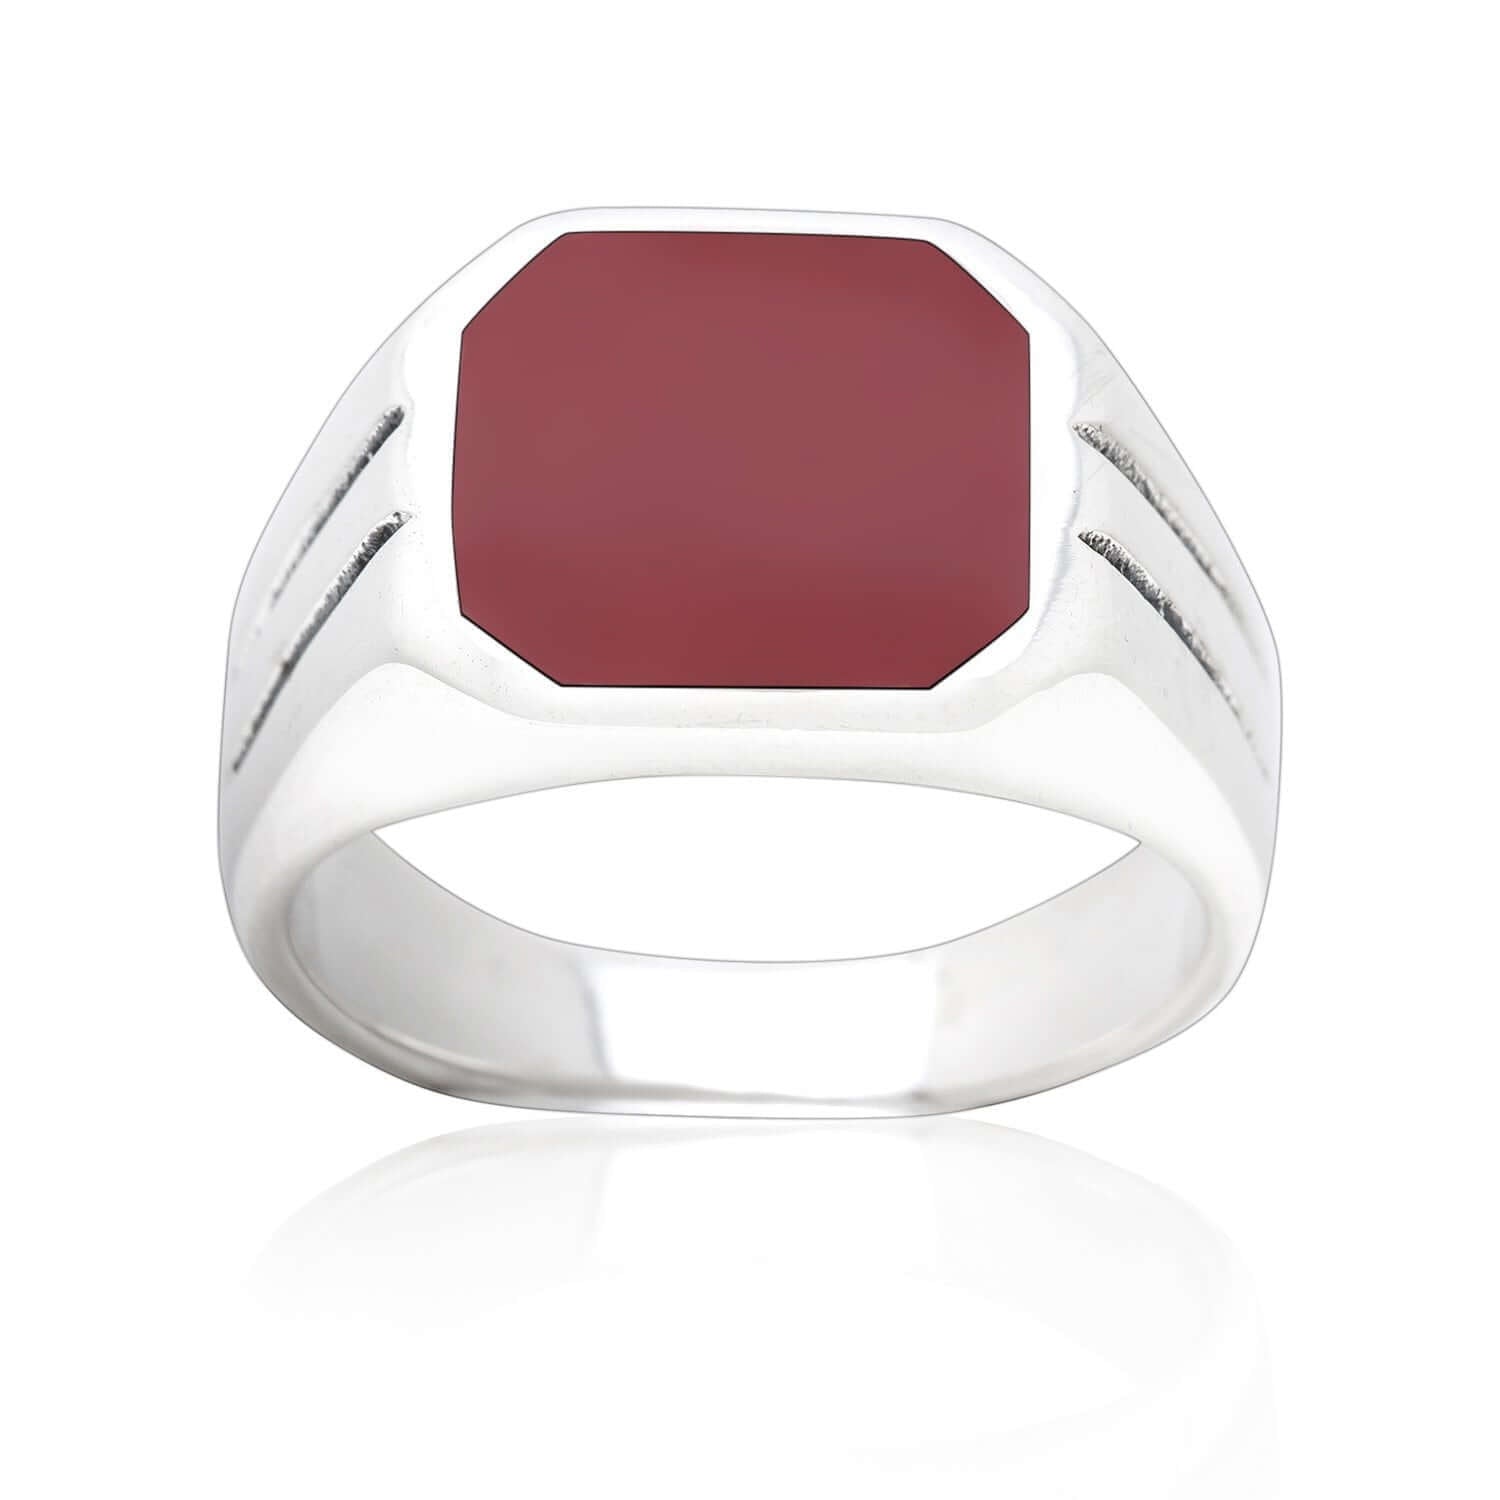 925 Sterling Silver Mens Carnelian Classic Band Ring